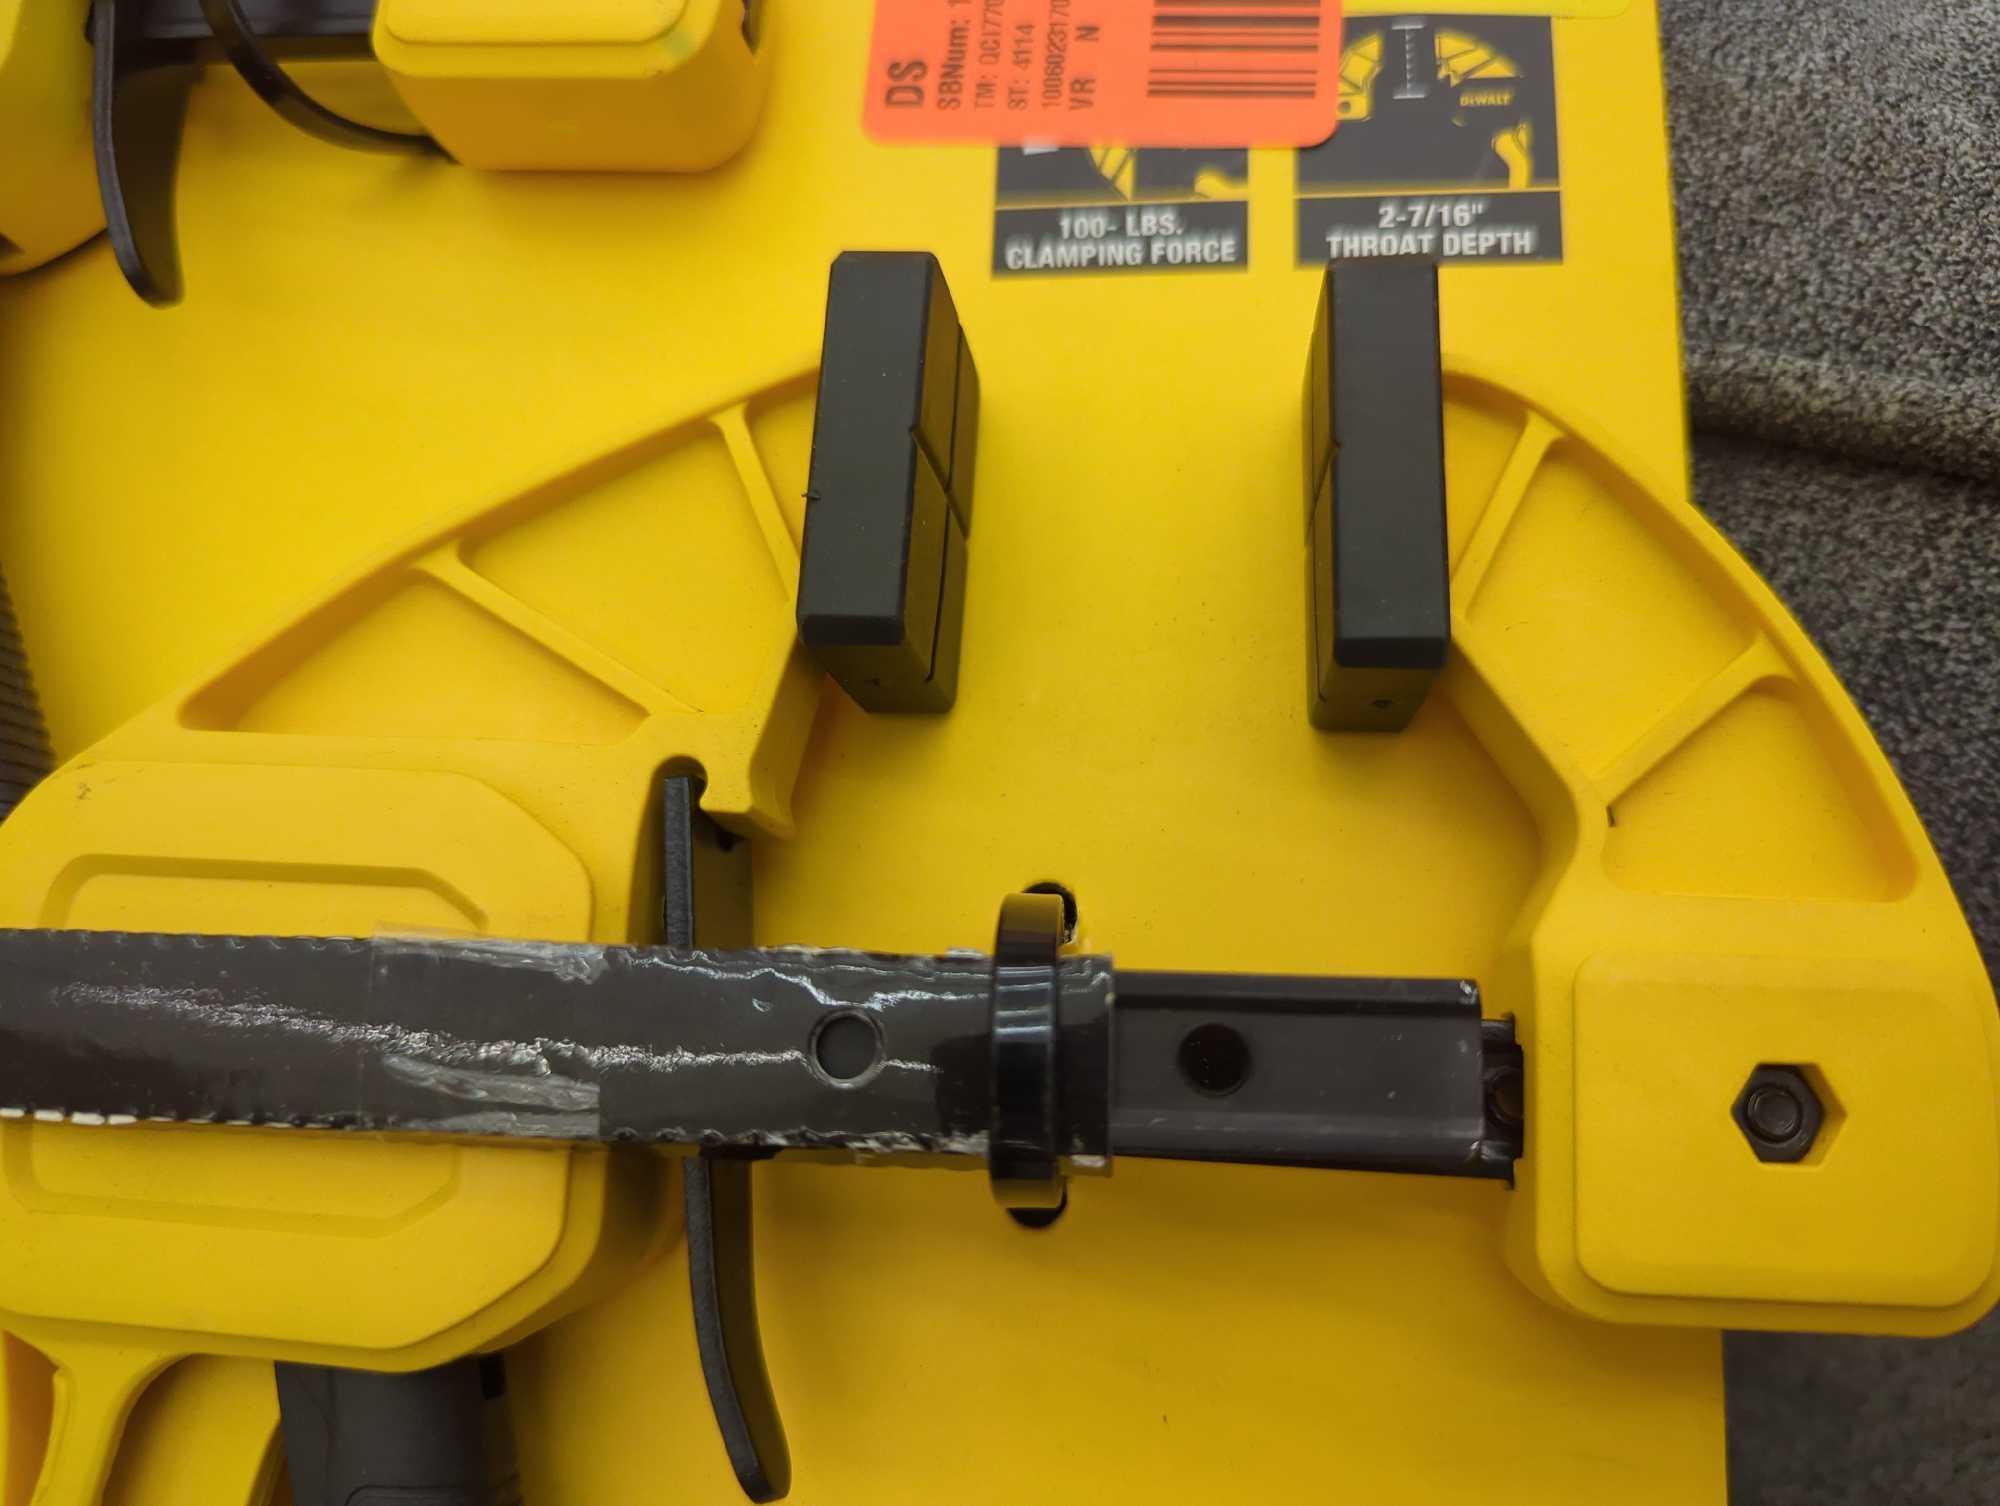 (Missing One Clamp) DEWALT Trigger Clamp Set (6-Piece), Appears to be New Is Missing One Clamp